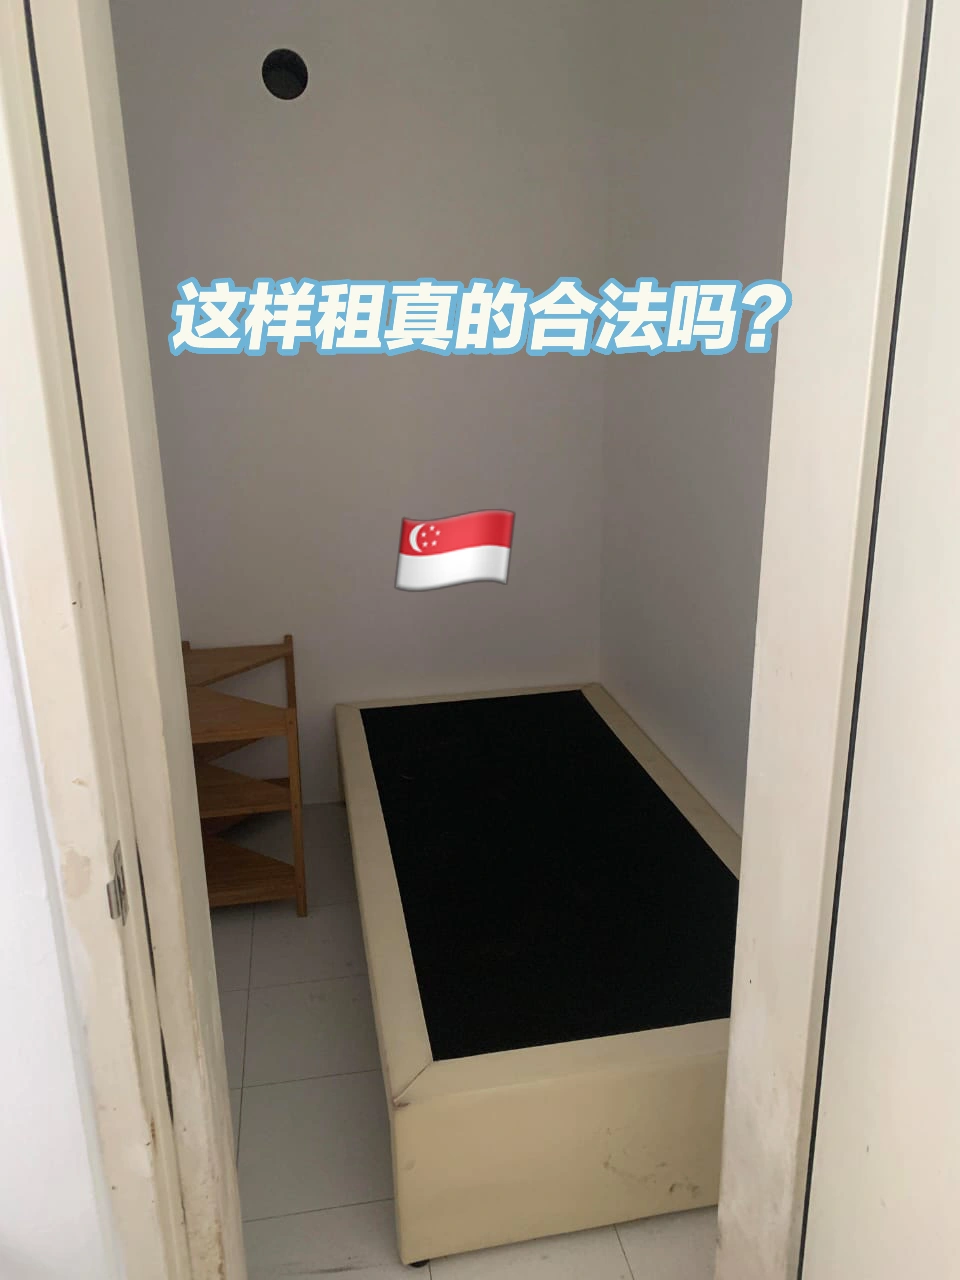 Windowless bomb shelter room being rented out for rm2,200 in s'pore shocks netizens